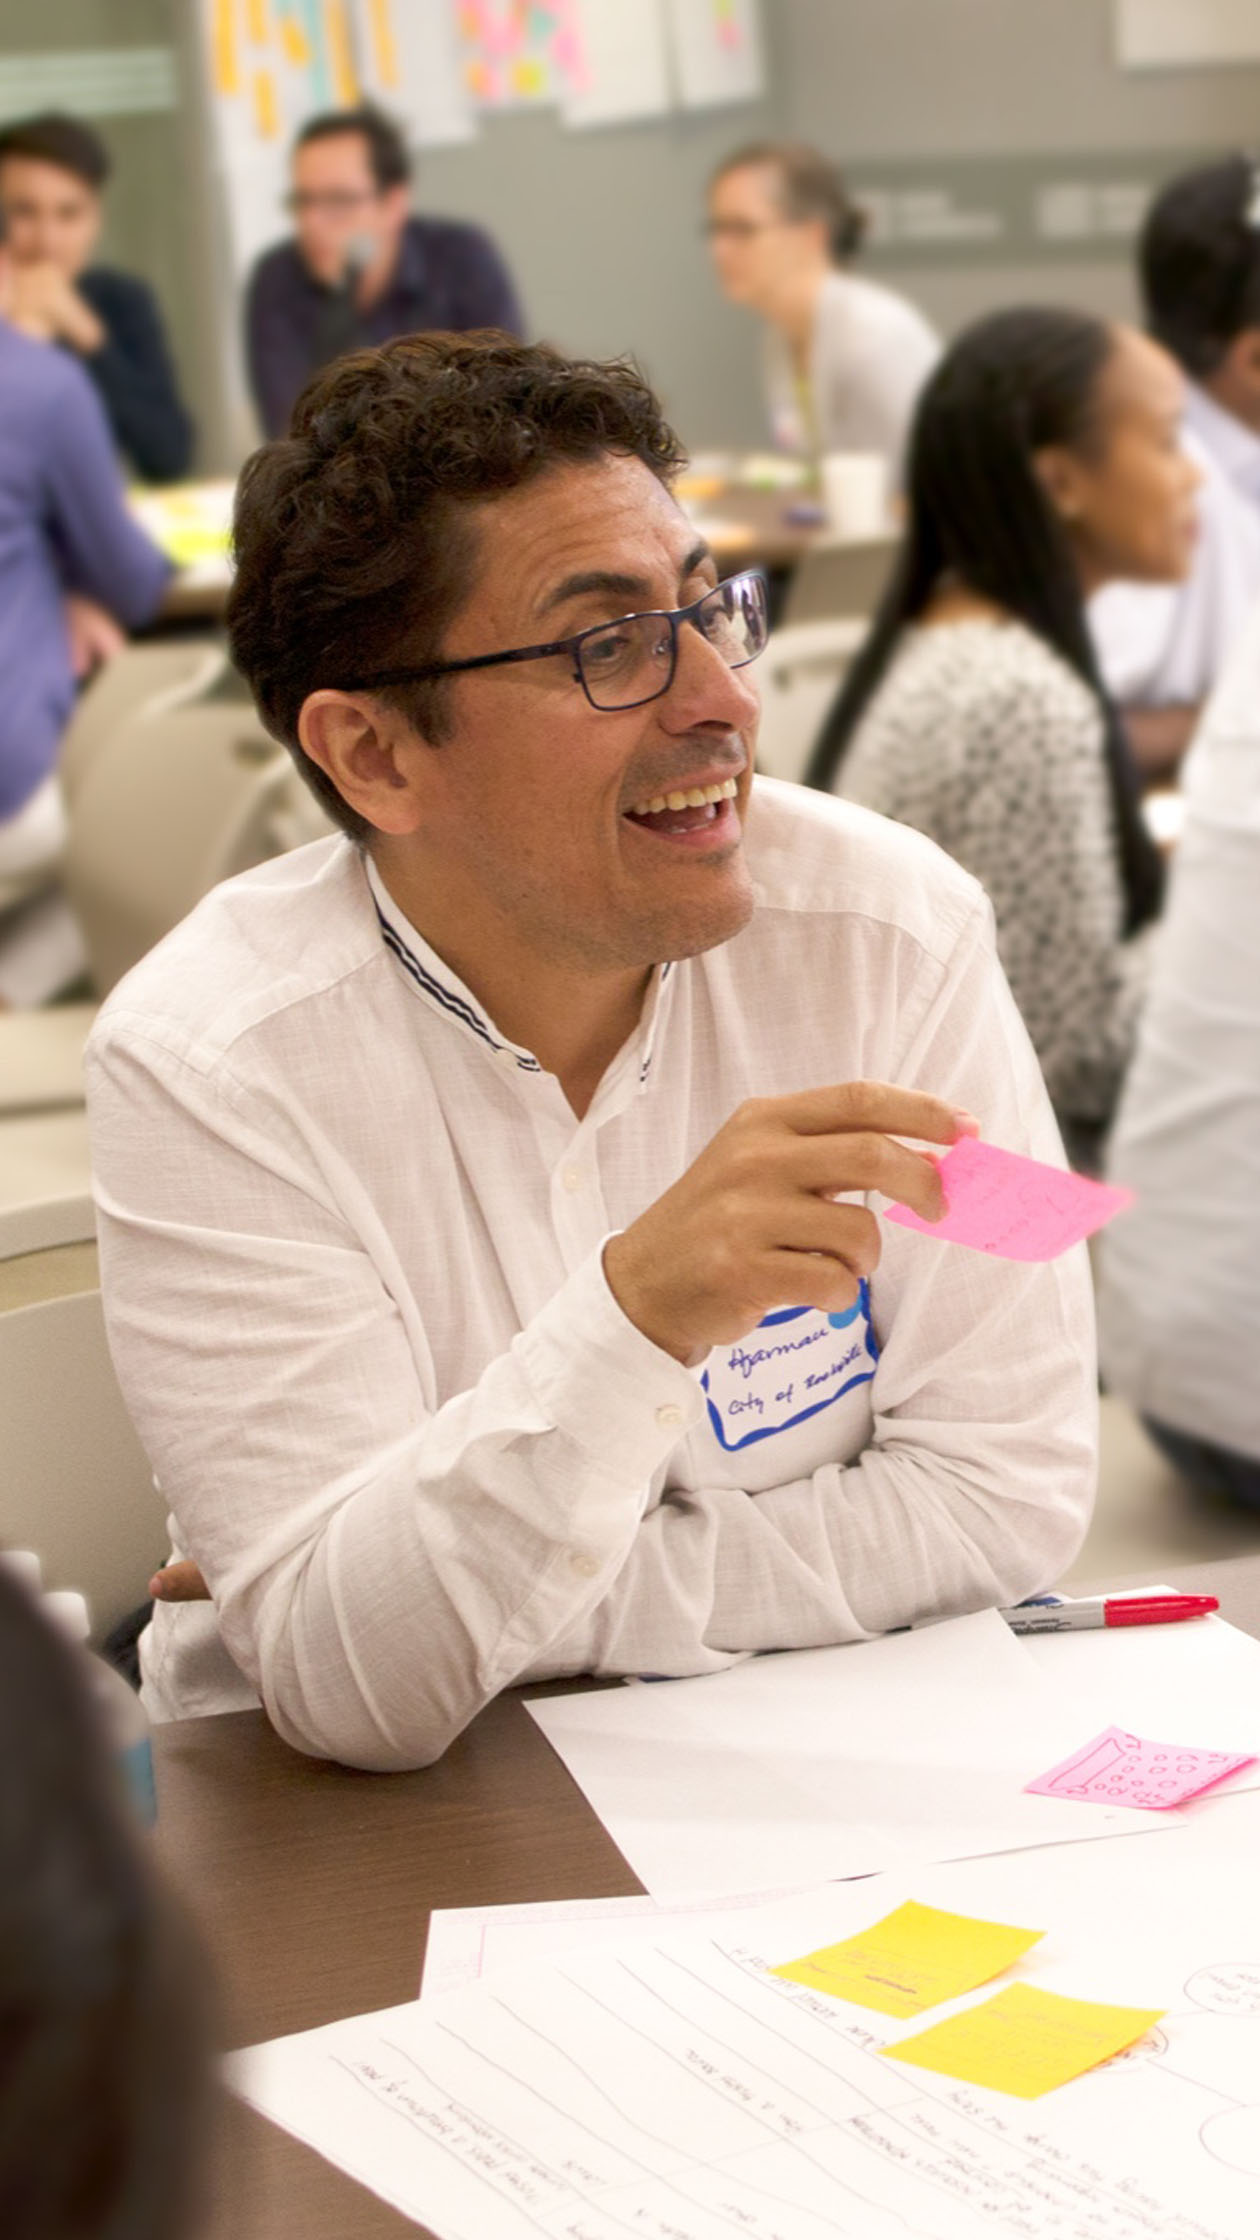 Image of a man at a table with sticky notes